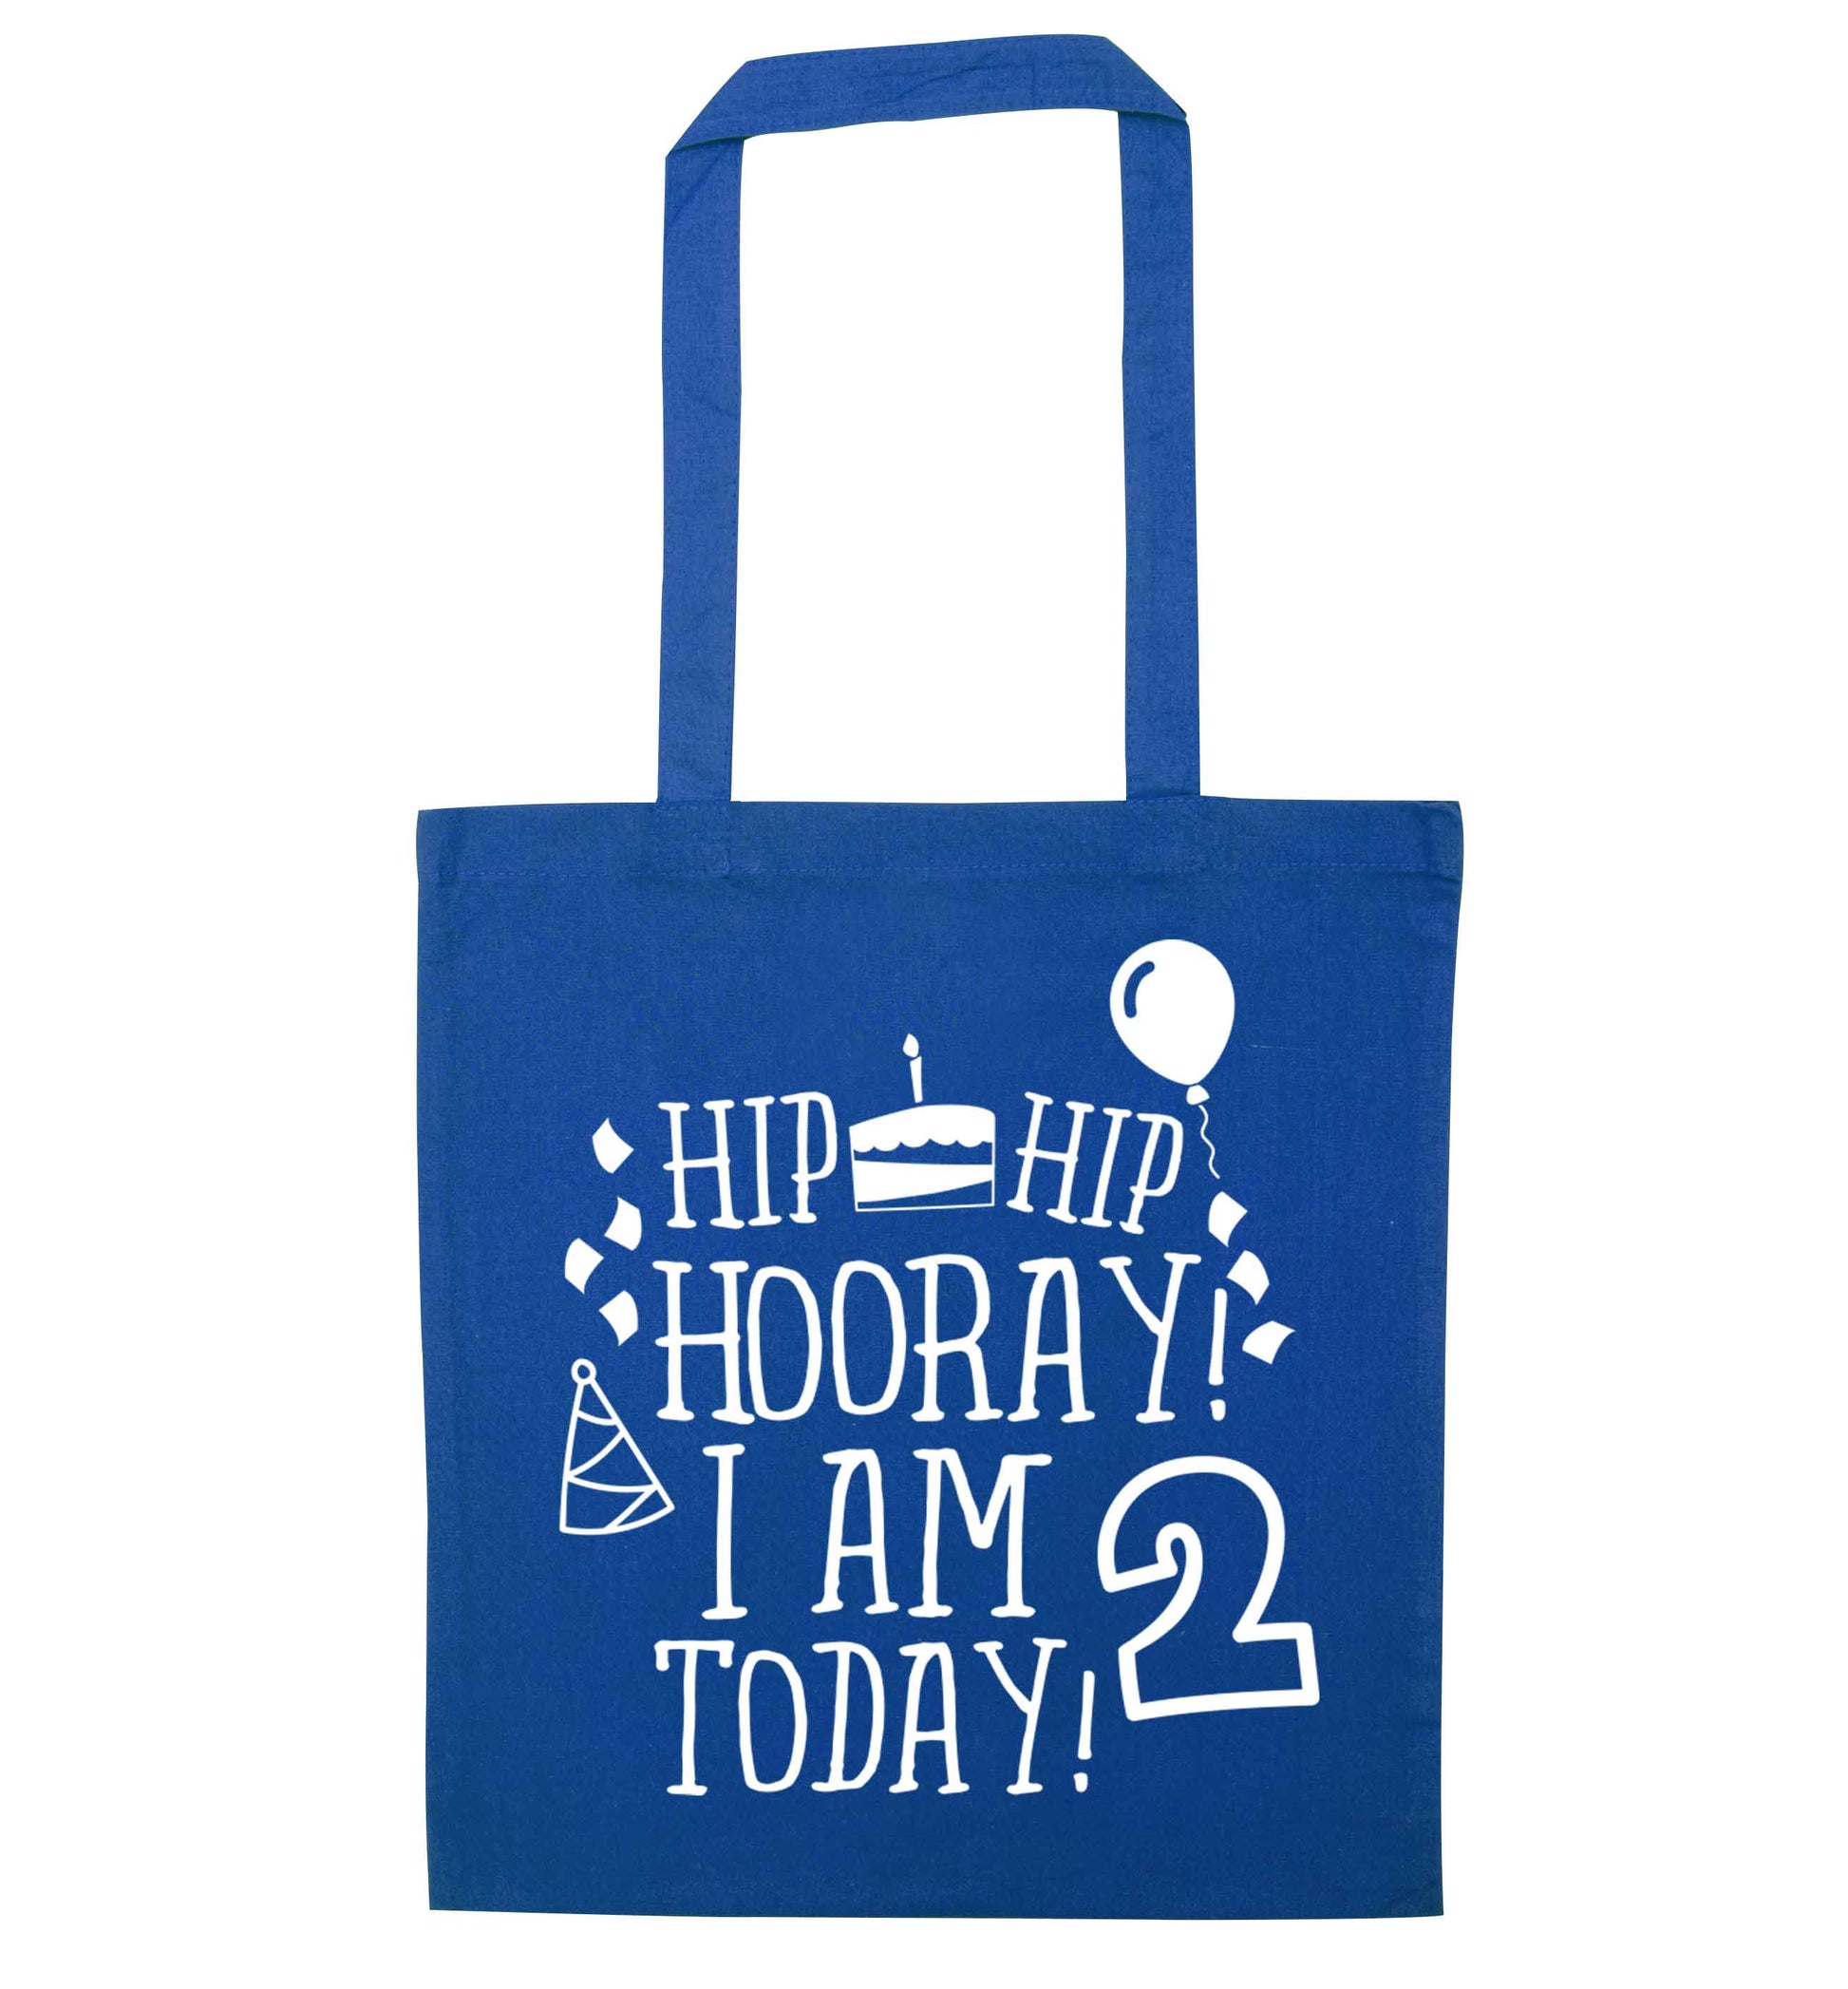 I'm 2 Today blue tote bag